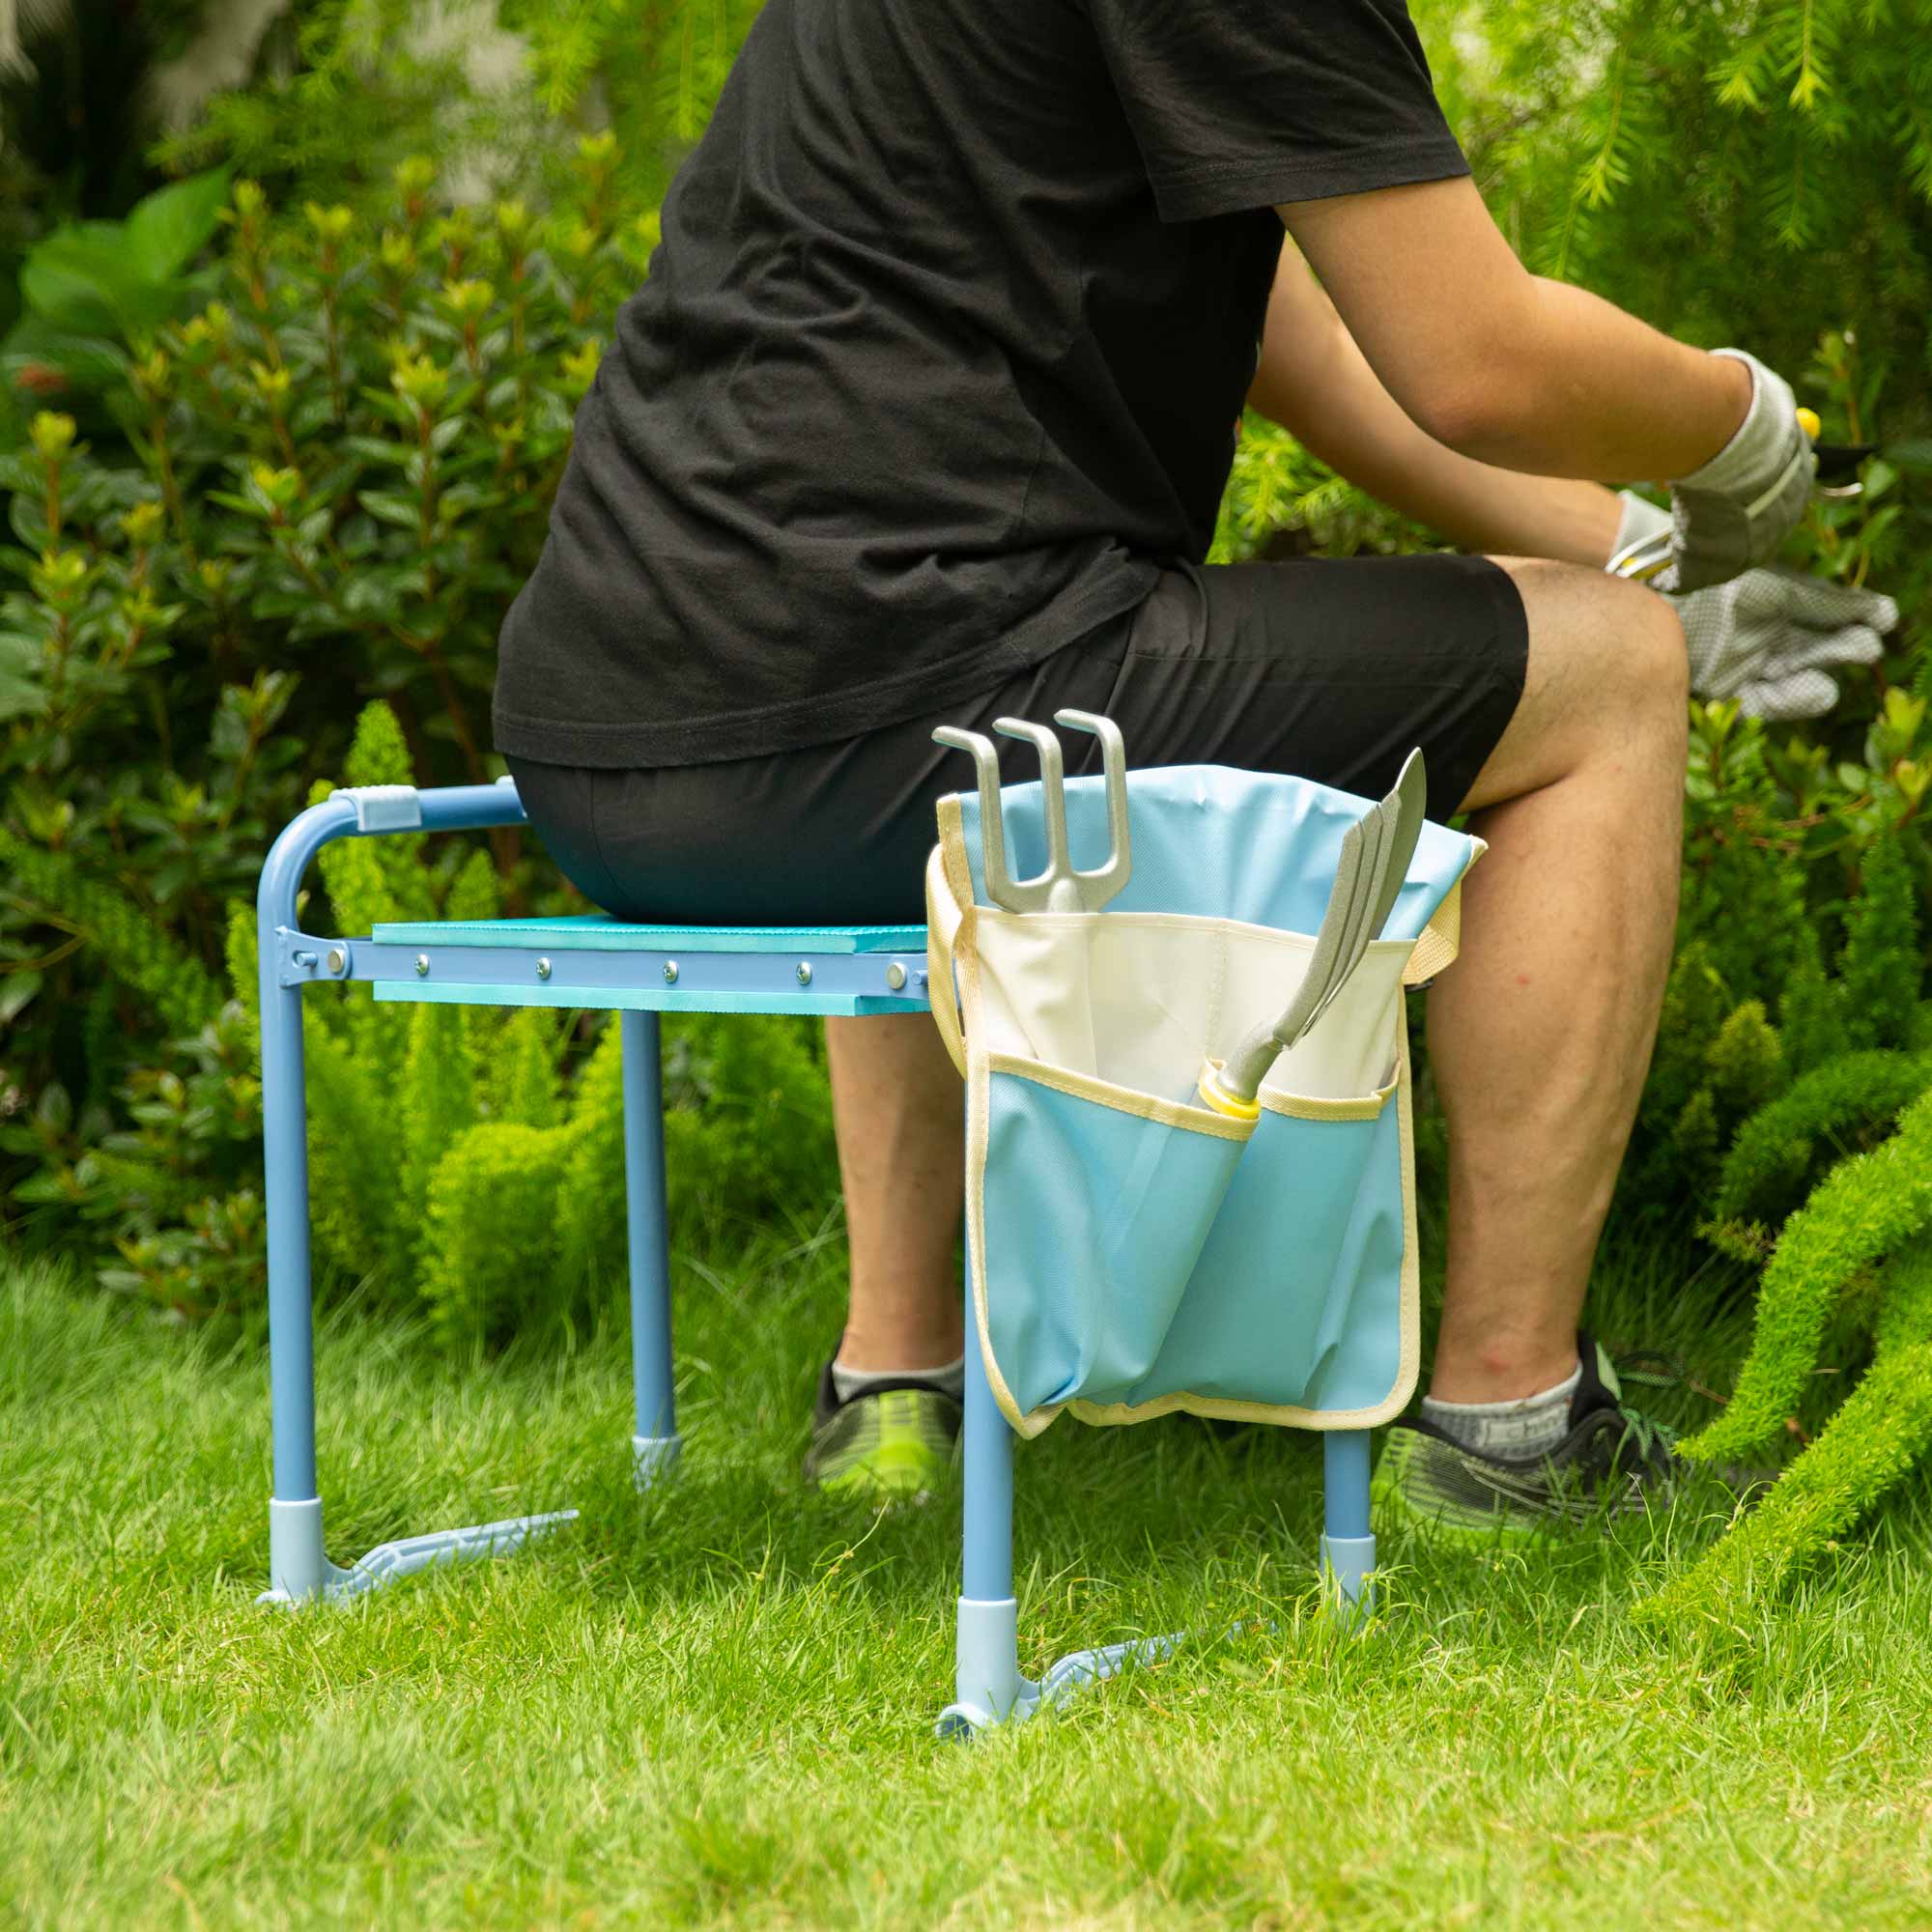 a man sits on the garden seat and kneeler 